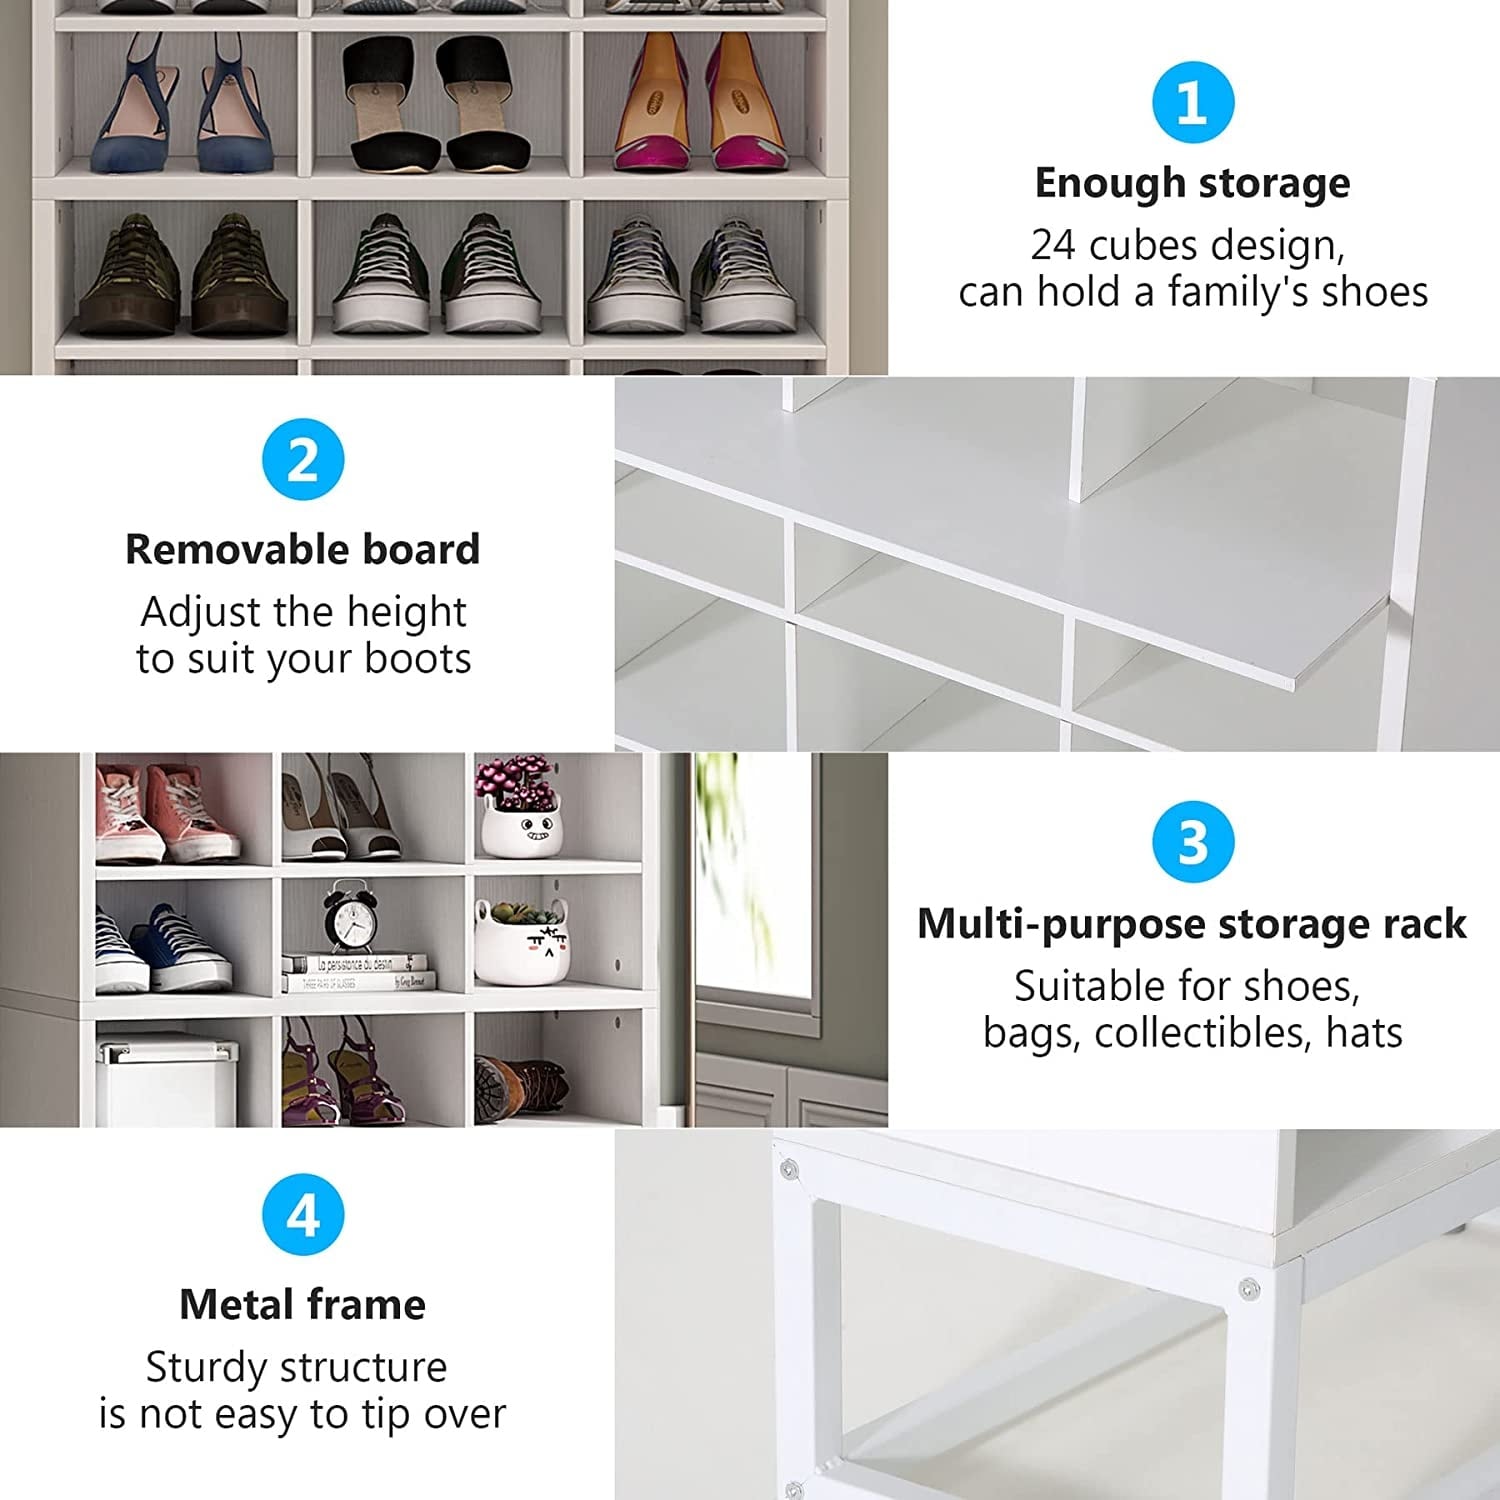 https://ak1.ostkcdn.com/images/products/is/images/direct/f884e2ddcb5b1eda0d89b95b0f0f10c692ba93ec/White-Shoe-Cabinet%2C-8-Tier-White-Shoe-Storage-Organizer-with-24-Cubbies.jpg